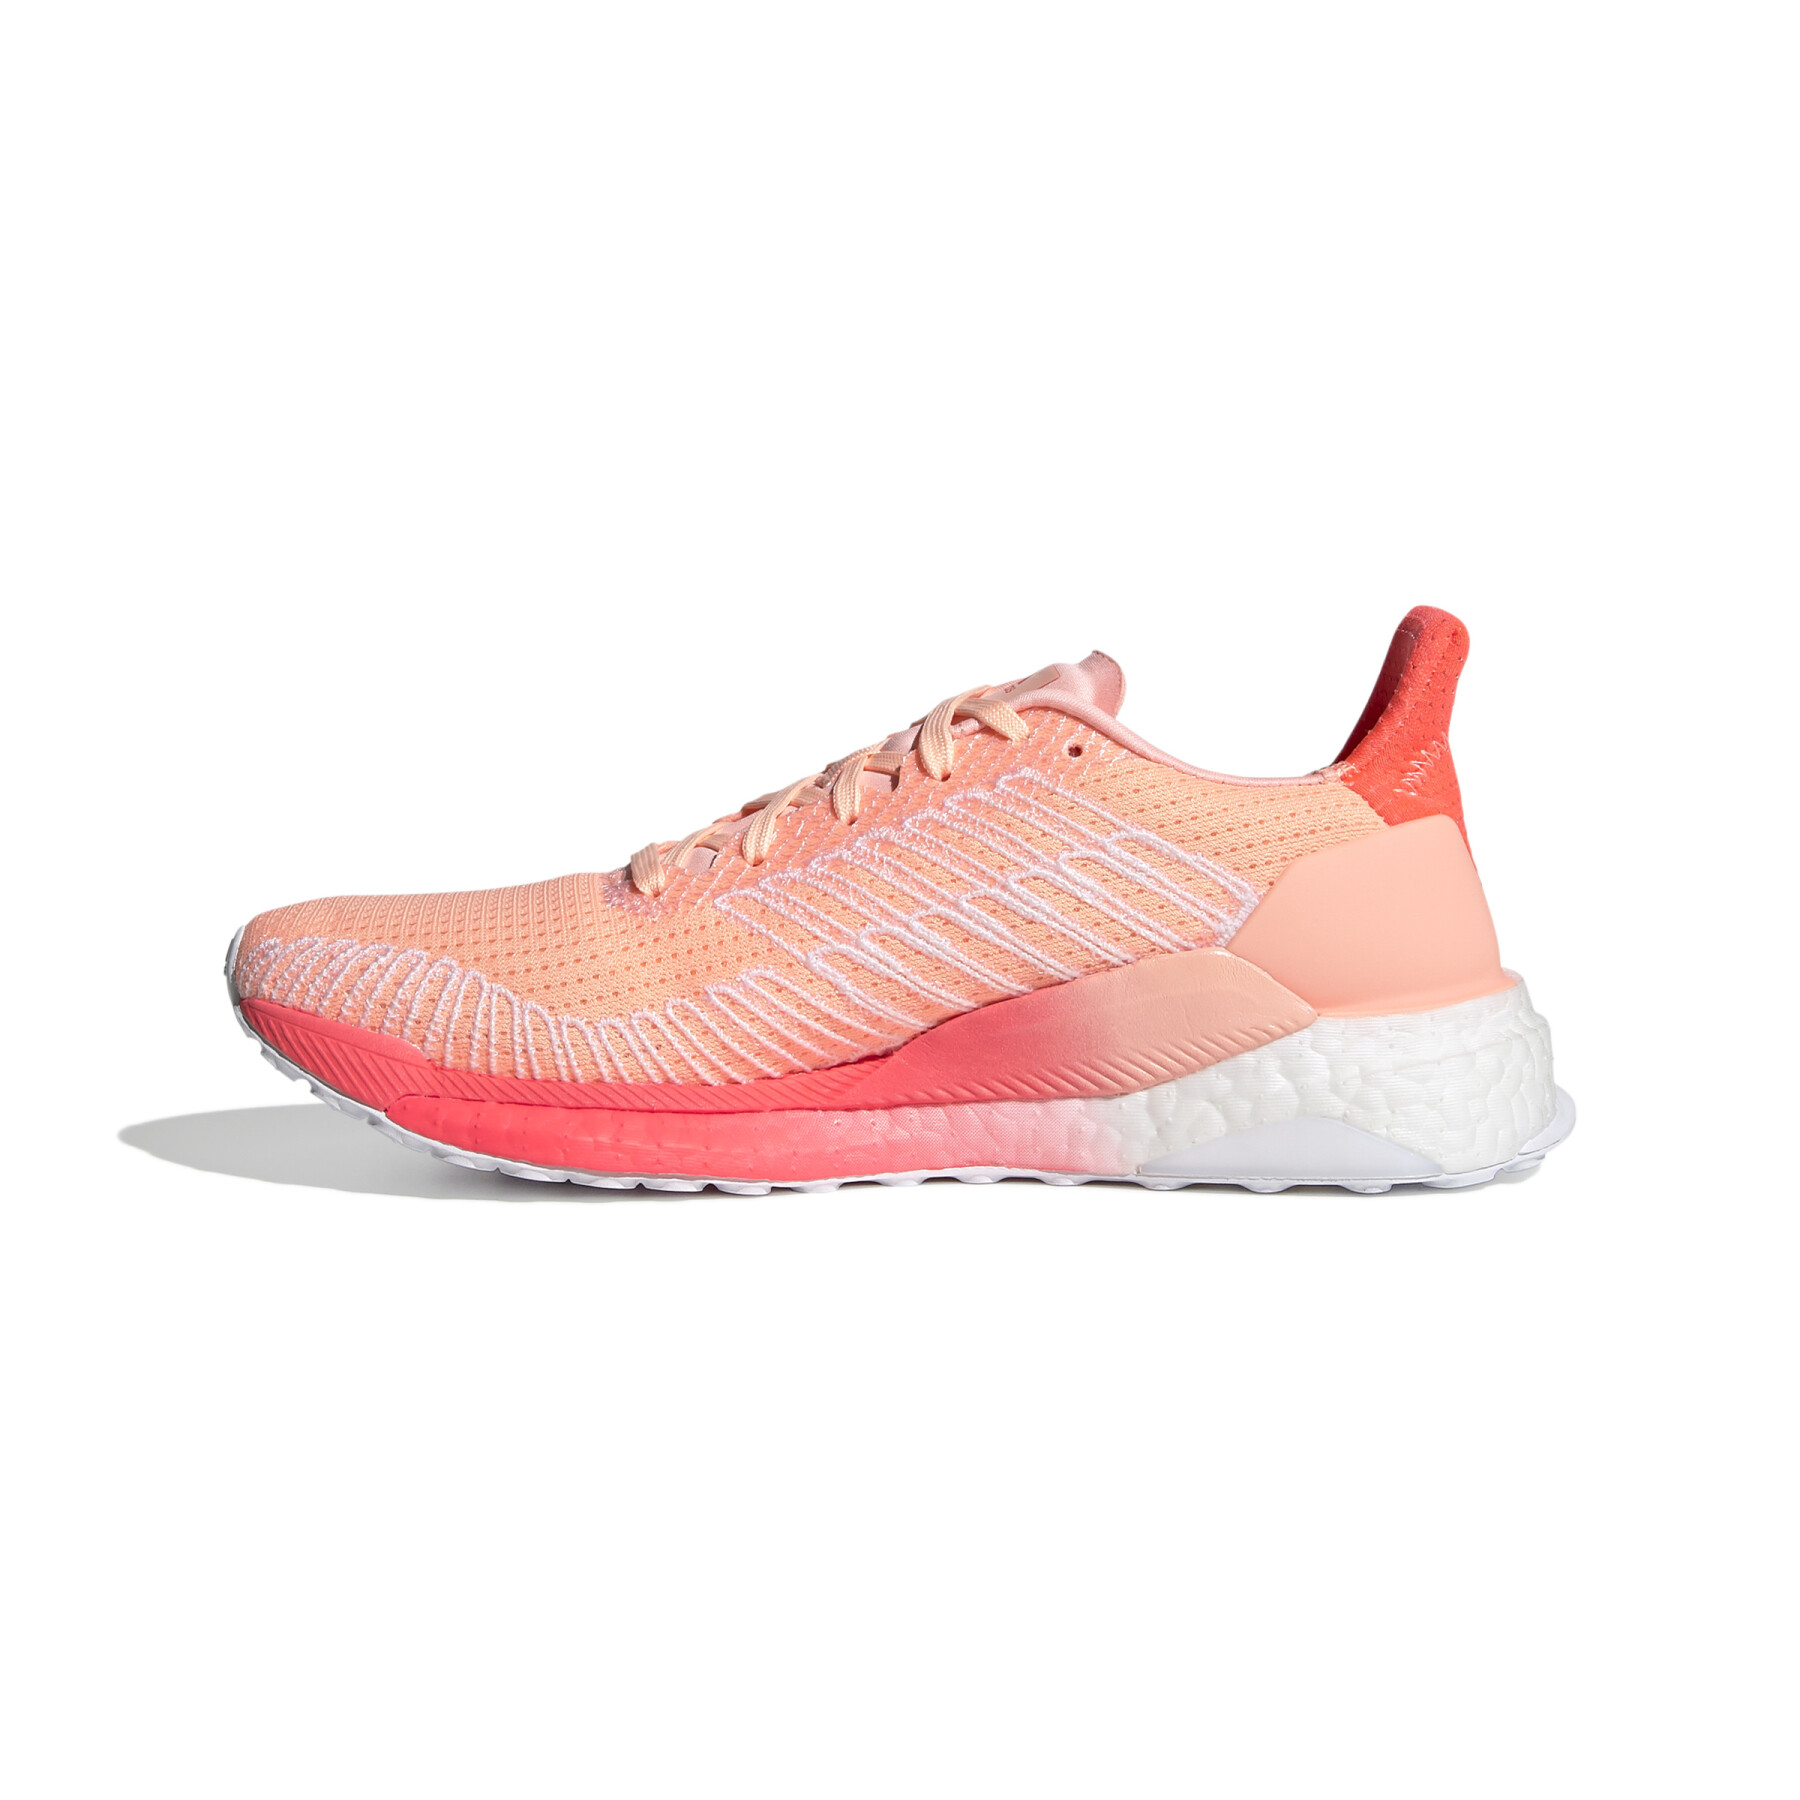 Women's running shoes adidas Solarboost 19